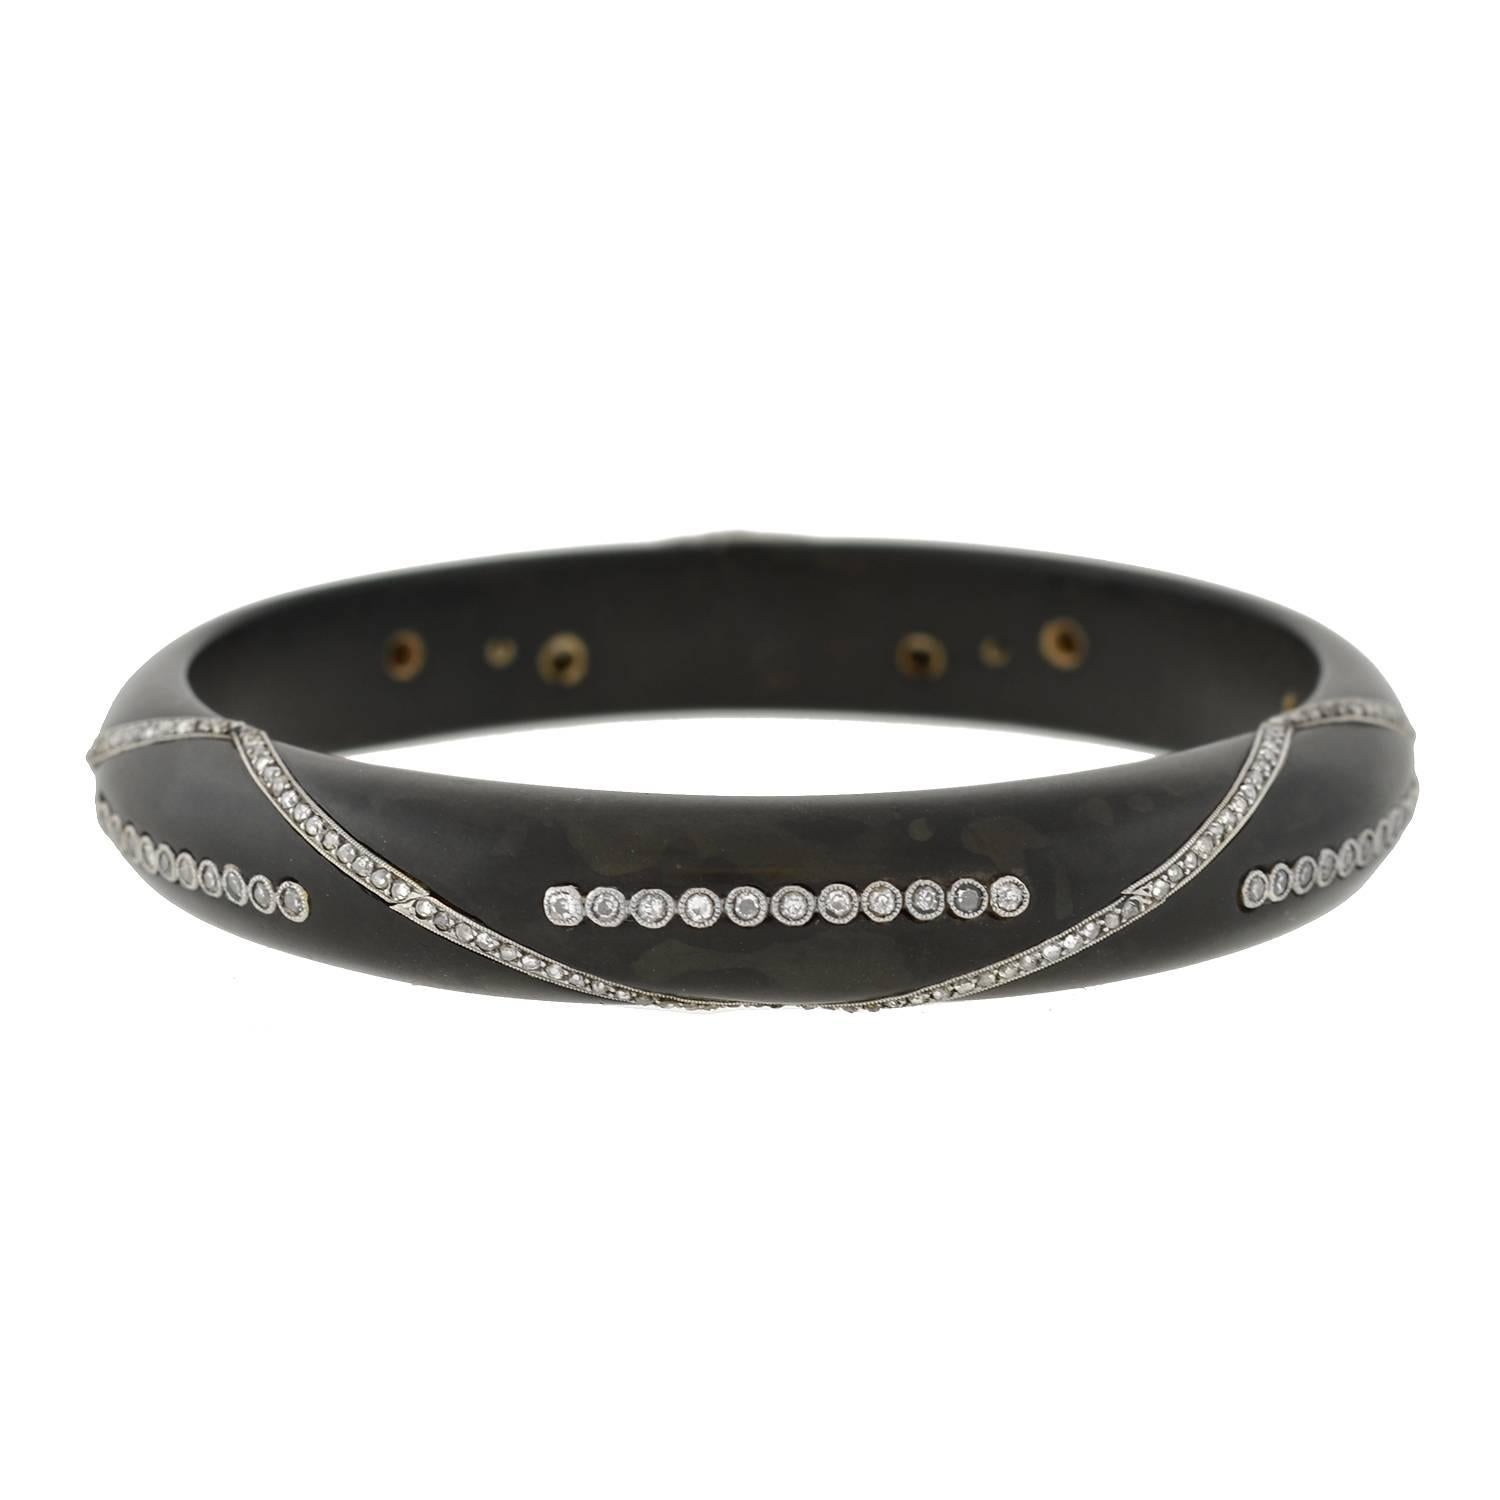 A very unusual bracelet from the Art Deco (ca1920) era! This stylish slip-on bangle is hand carved from ebony, which has a smooth, matte surface and rich black-brown color. Rows of delicate old single cut and rose cut diamonds decorate the surface